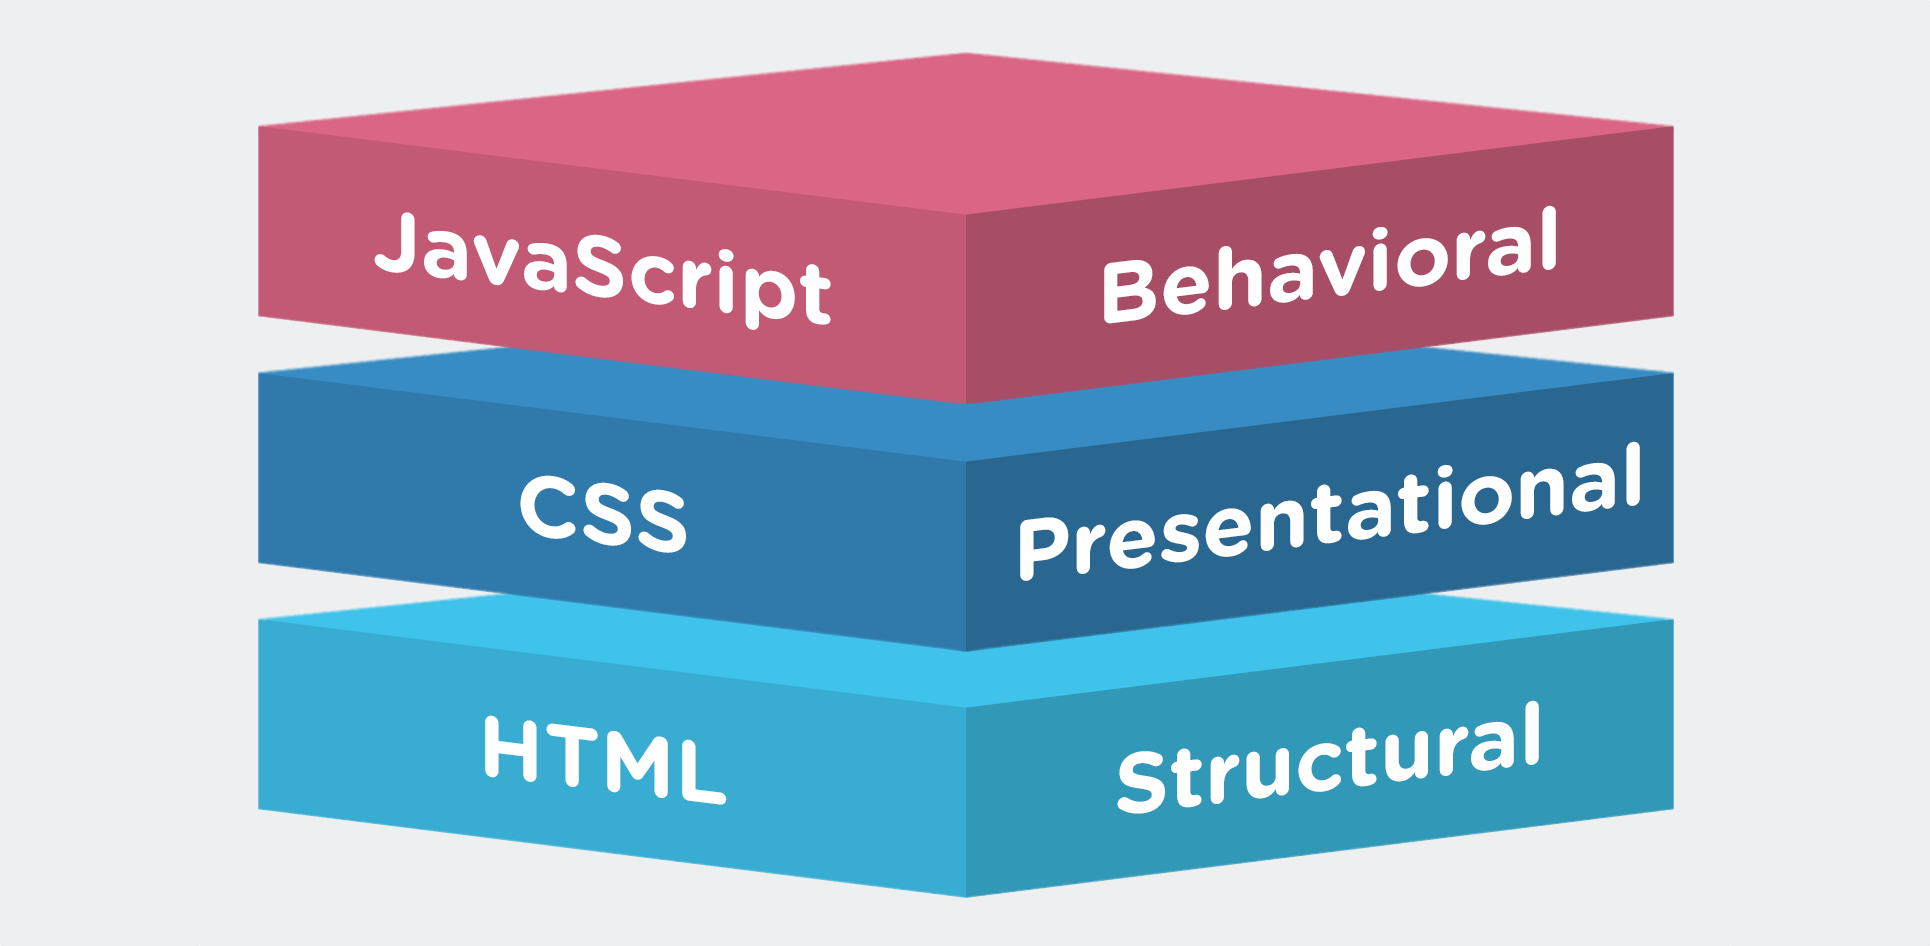 HTML is for structure, CSS is for presentation, and Javascript is for behavioral interaction